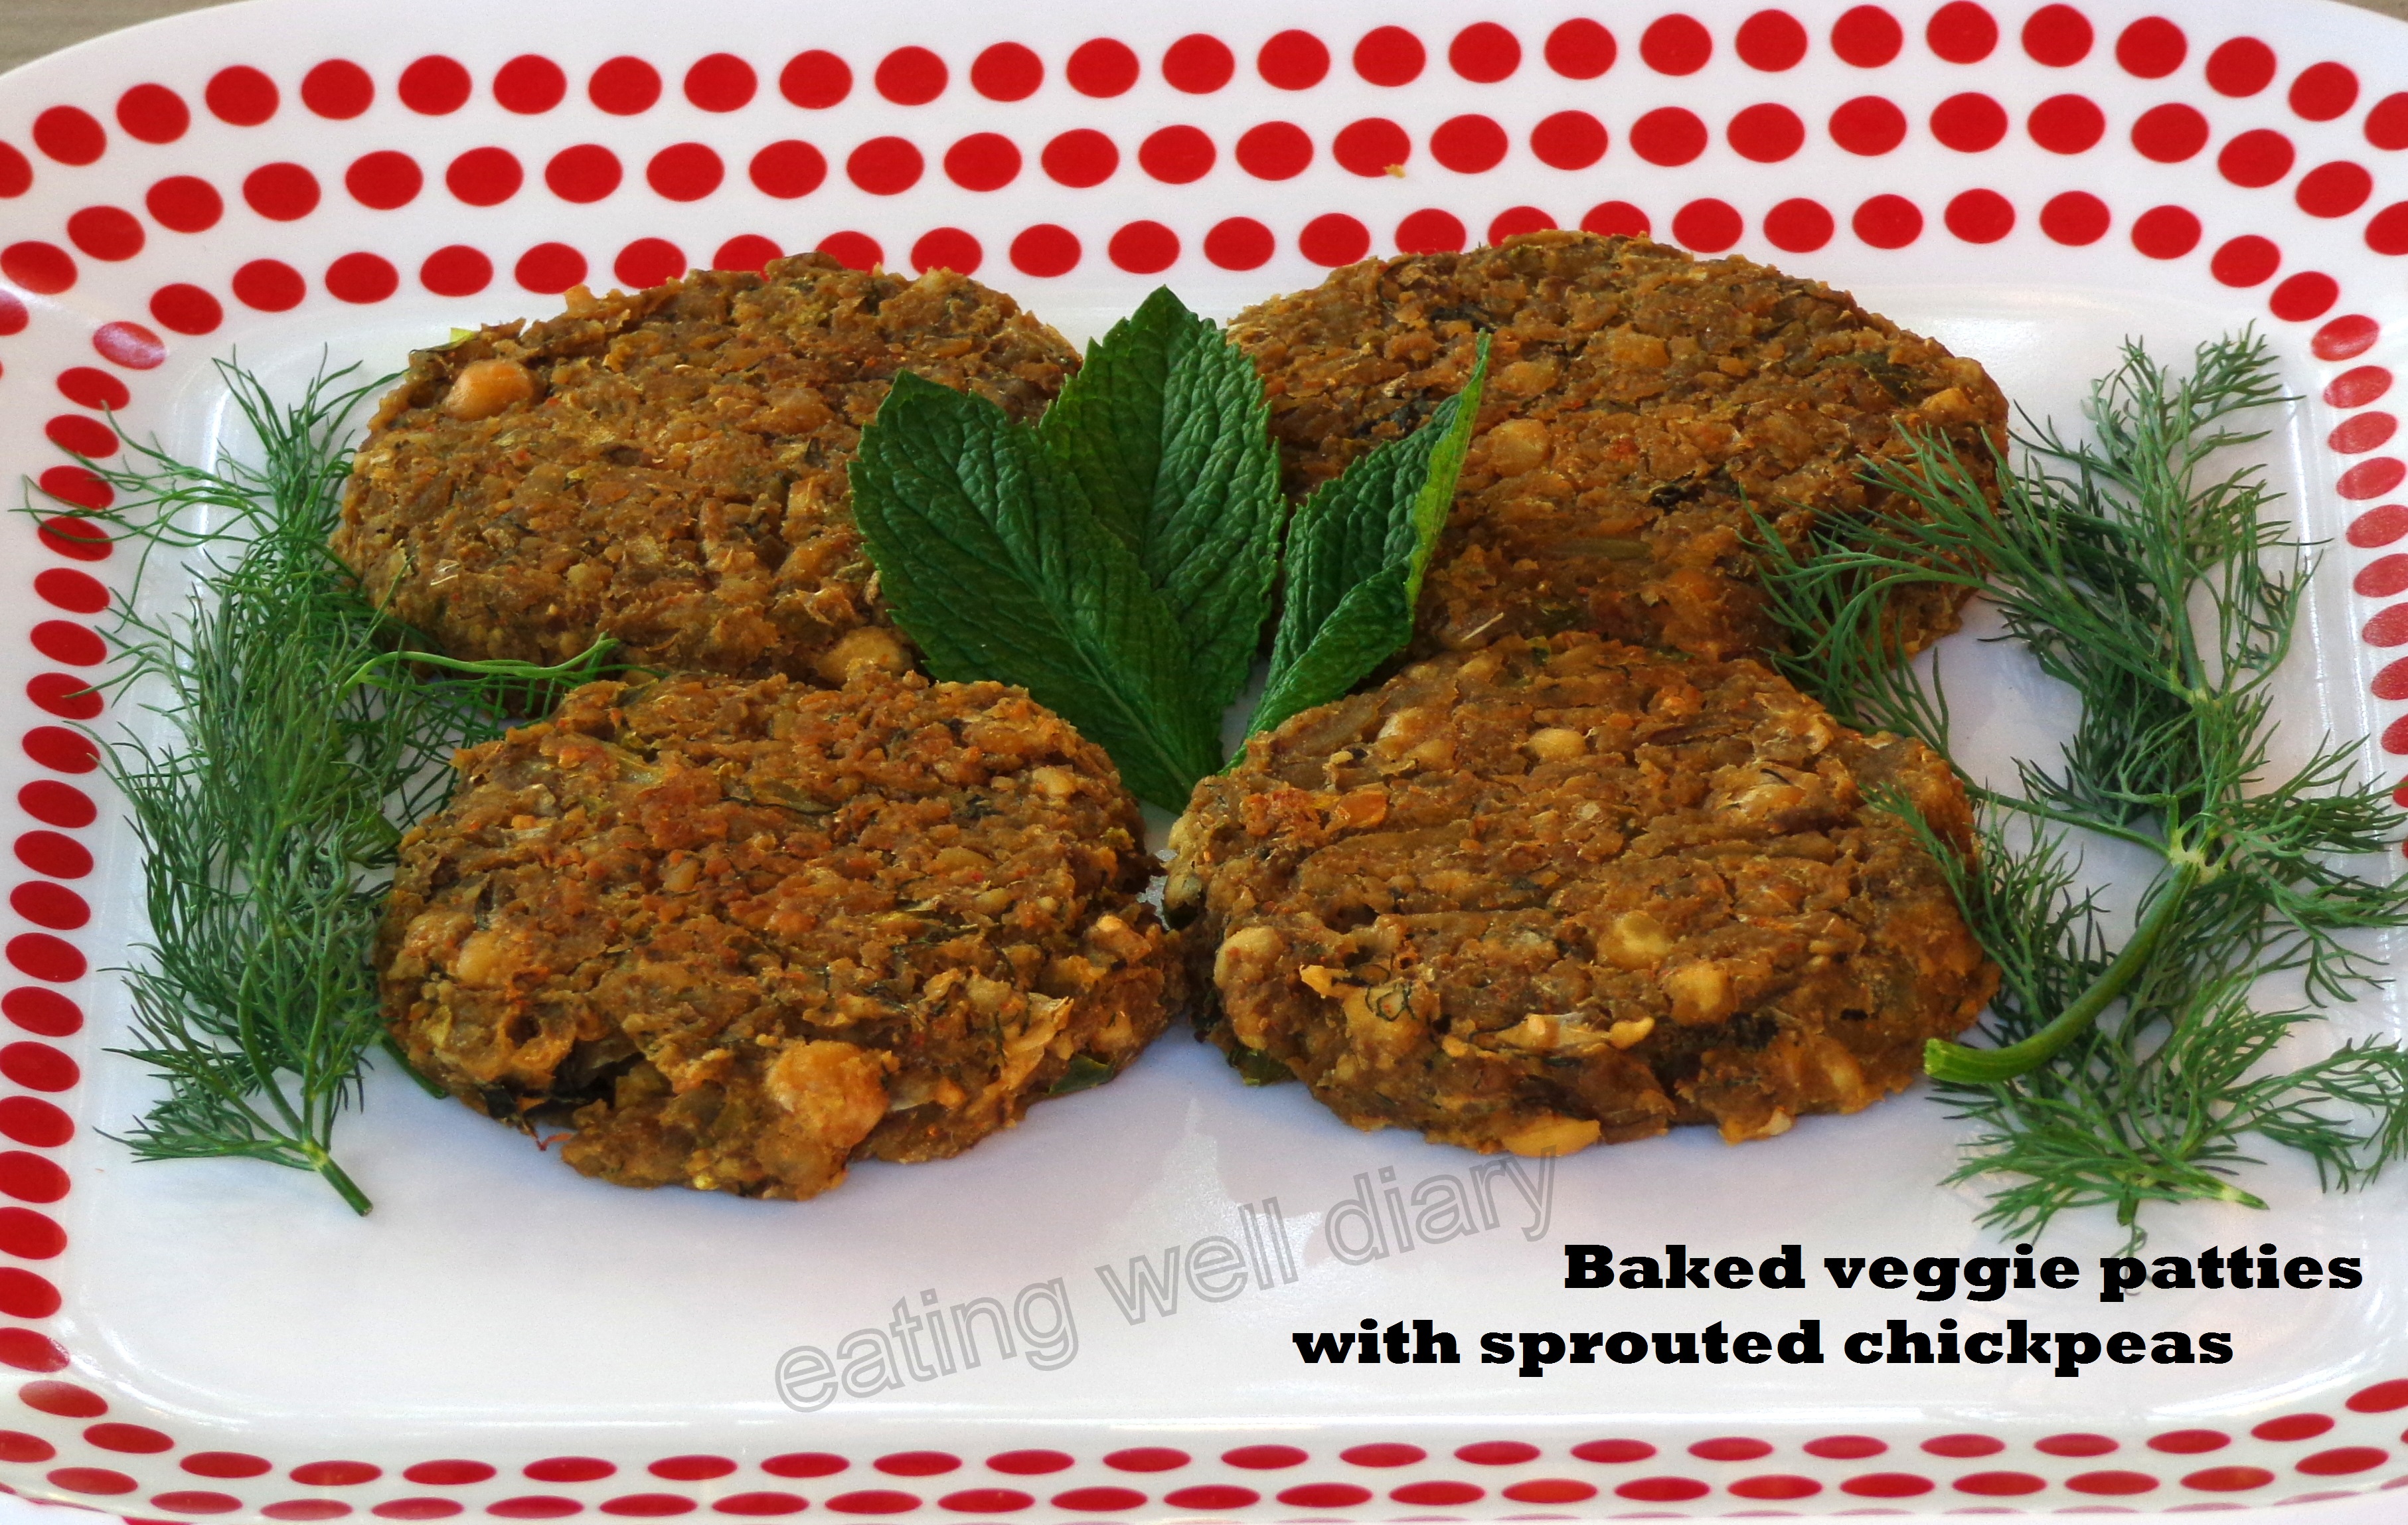 baked veggie patties/cutlets with sprouted chickpeas, dill and mint (grain-free, vegan)